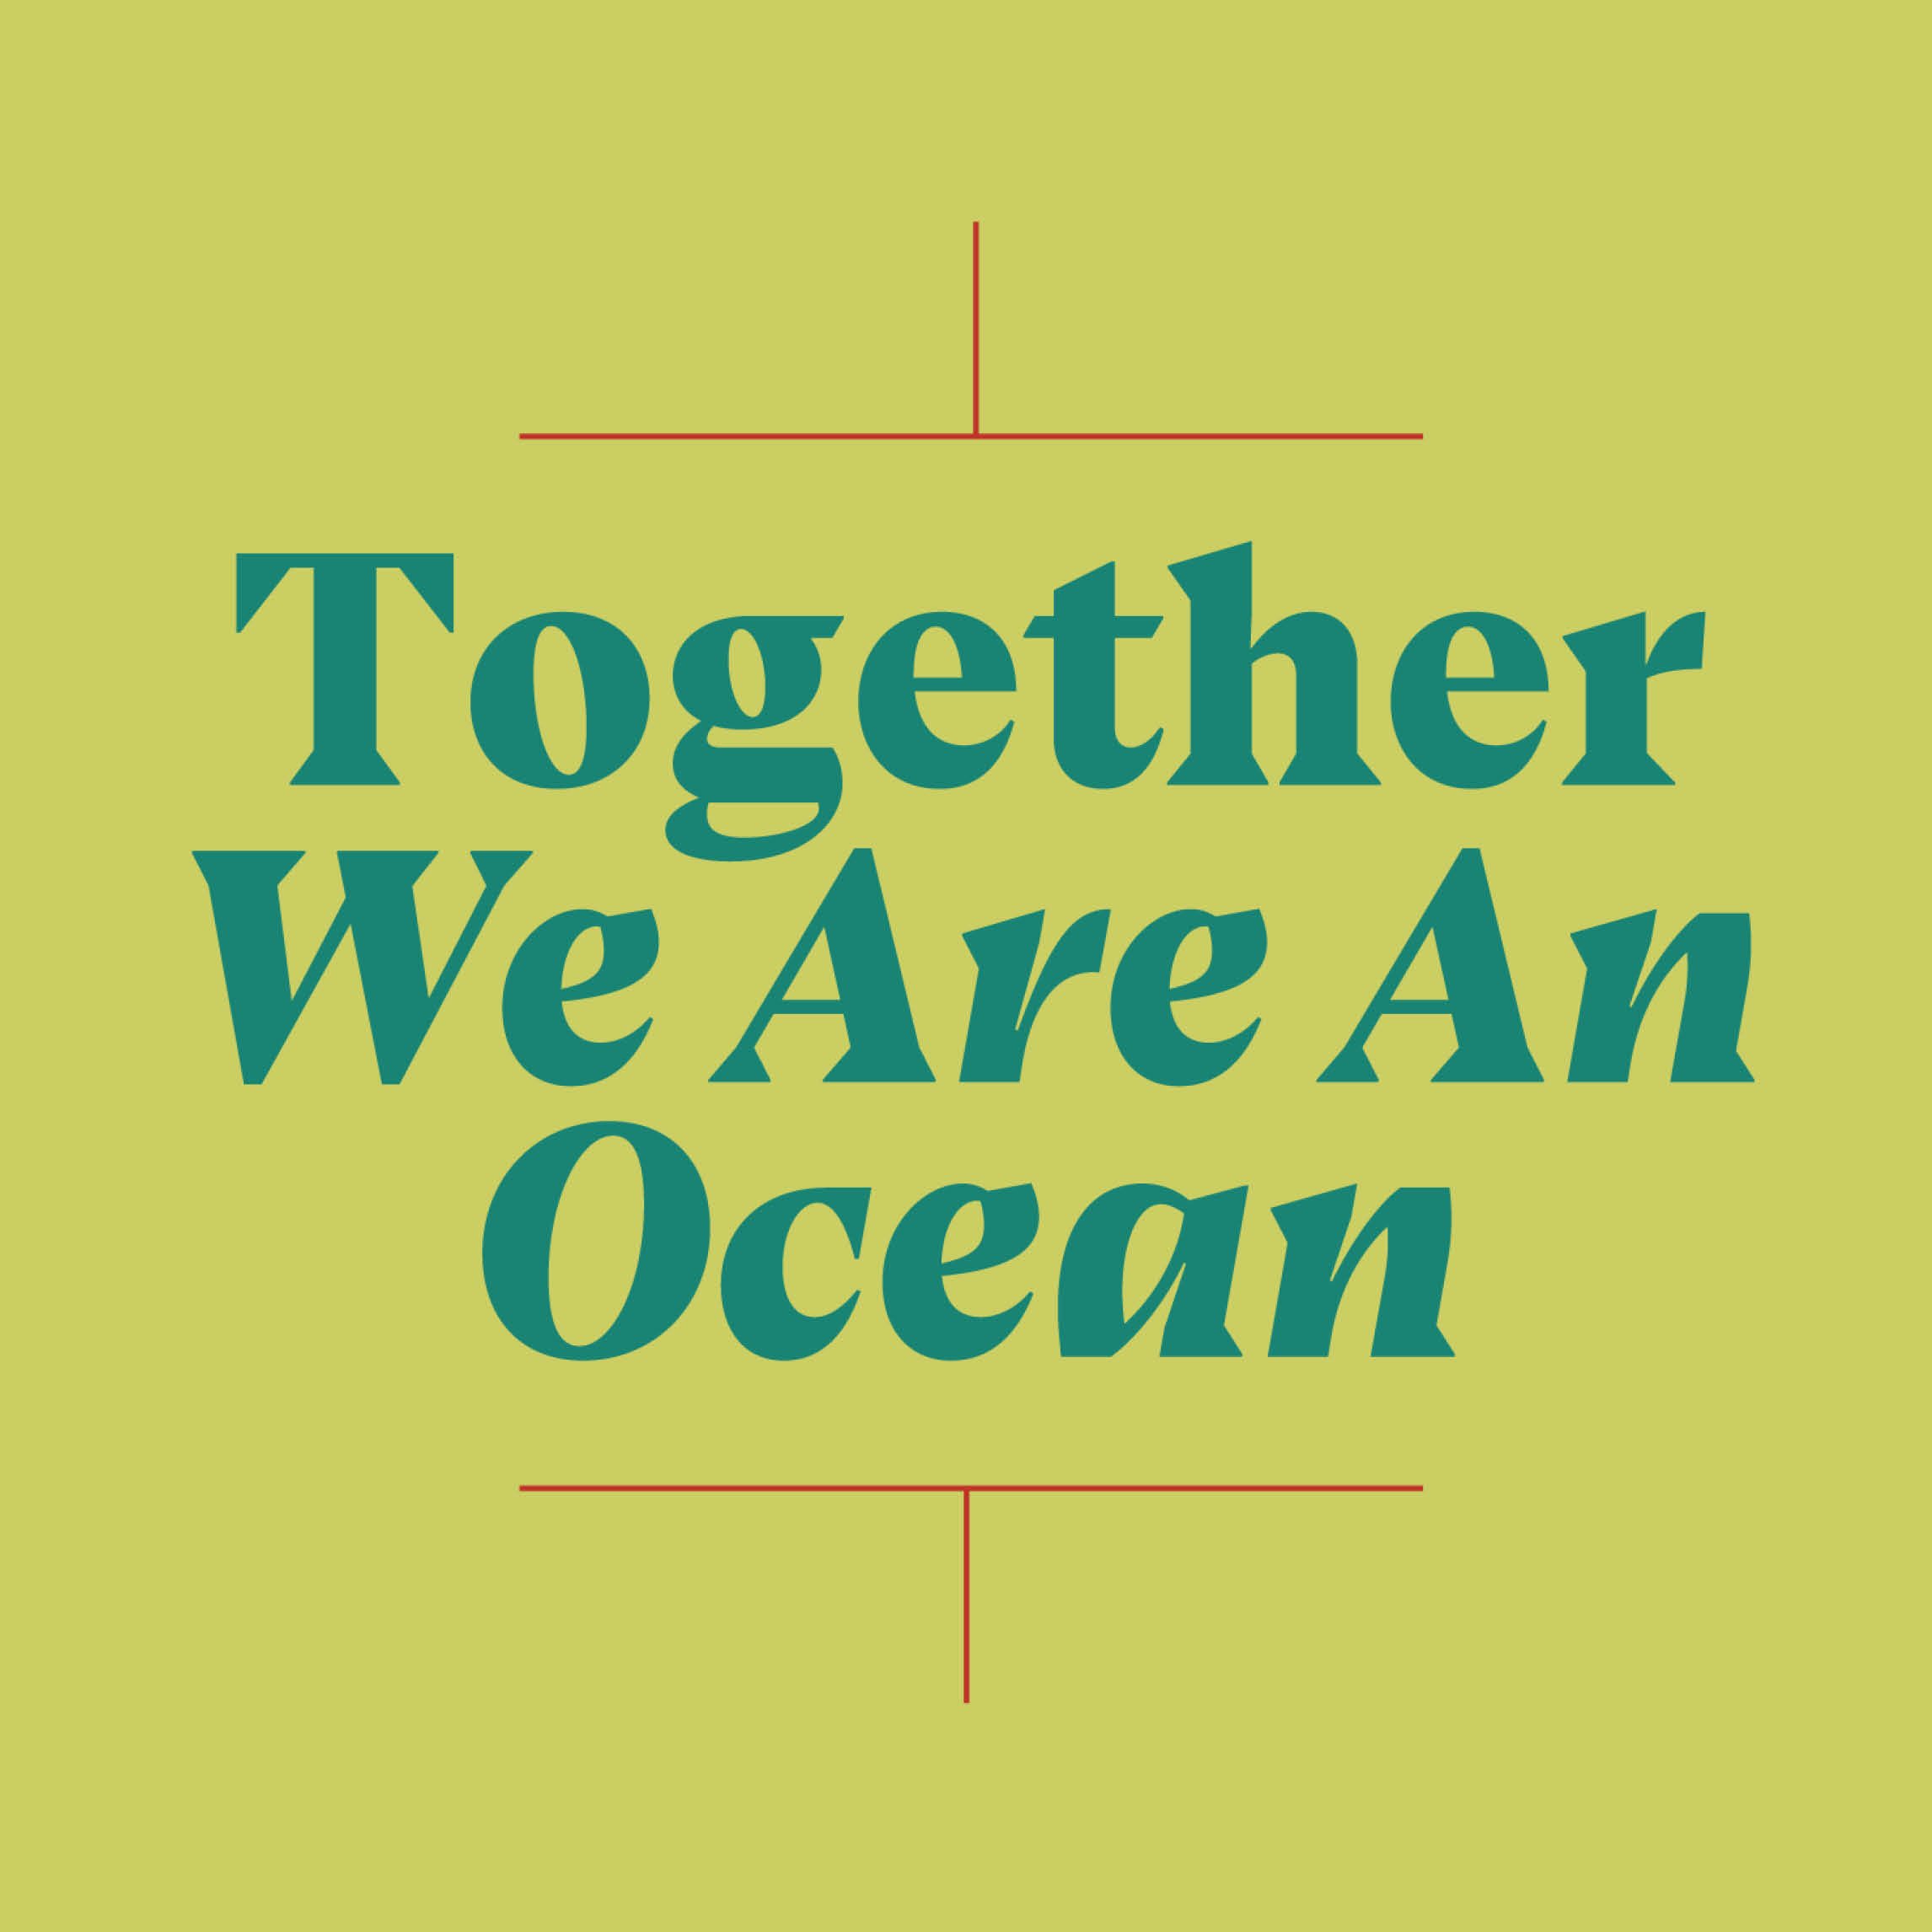 Together_We_Are_An_Ocean_2.jpg